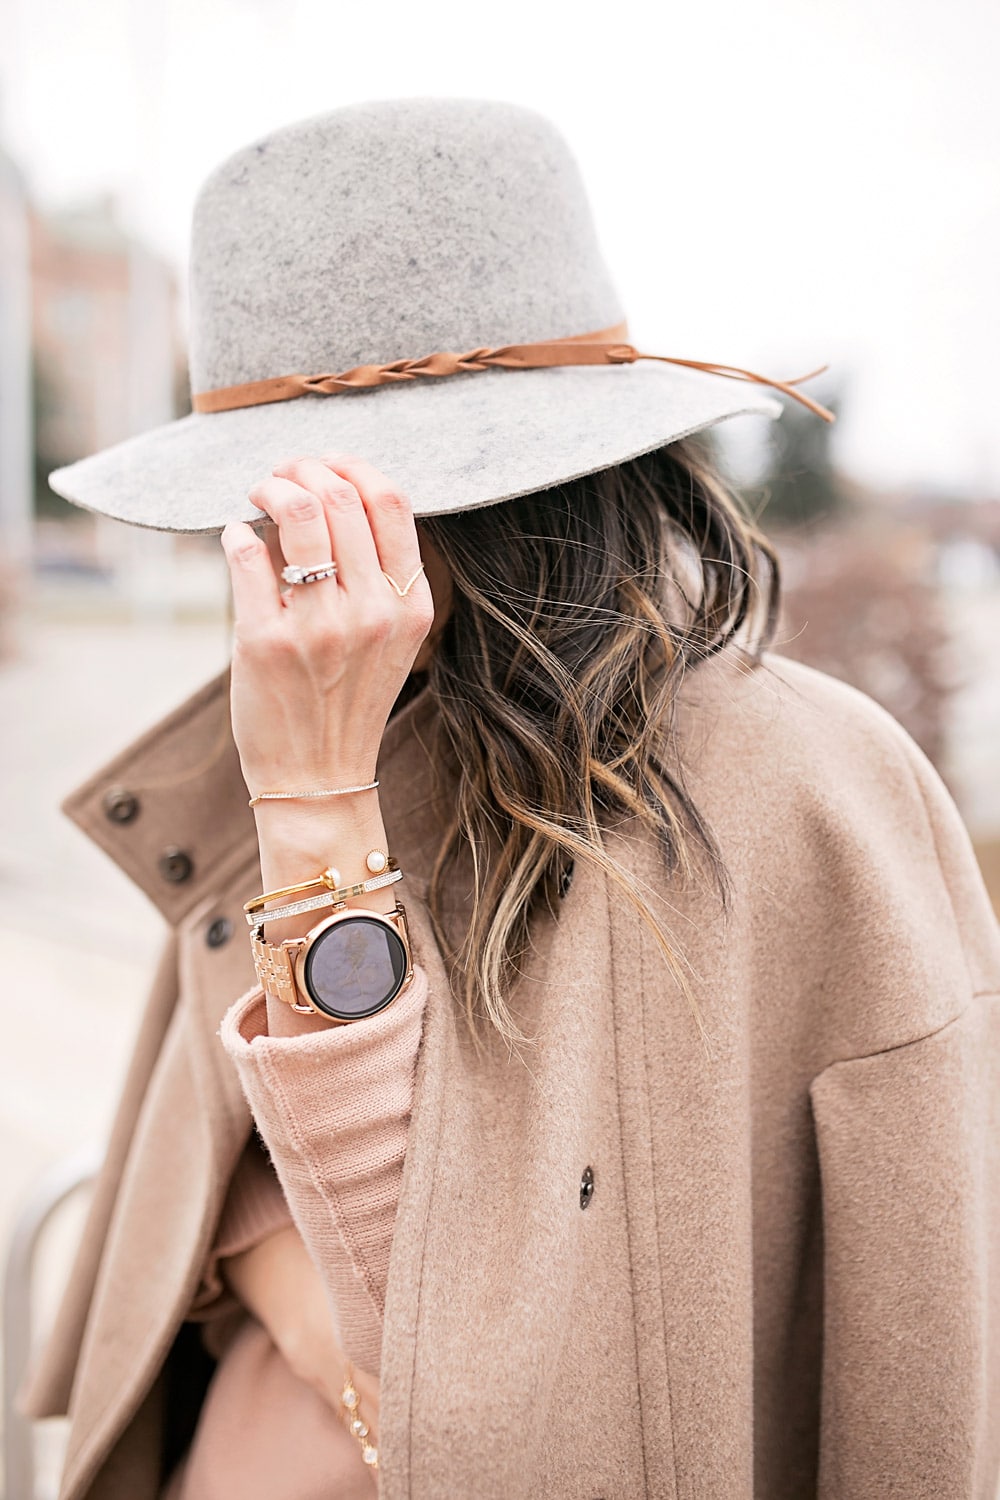 fossil q wander rose gold smartwatch, tan off the shoulder sweater with max mara coat,grey fedora